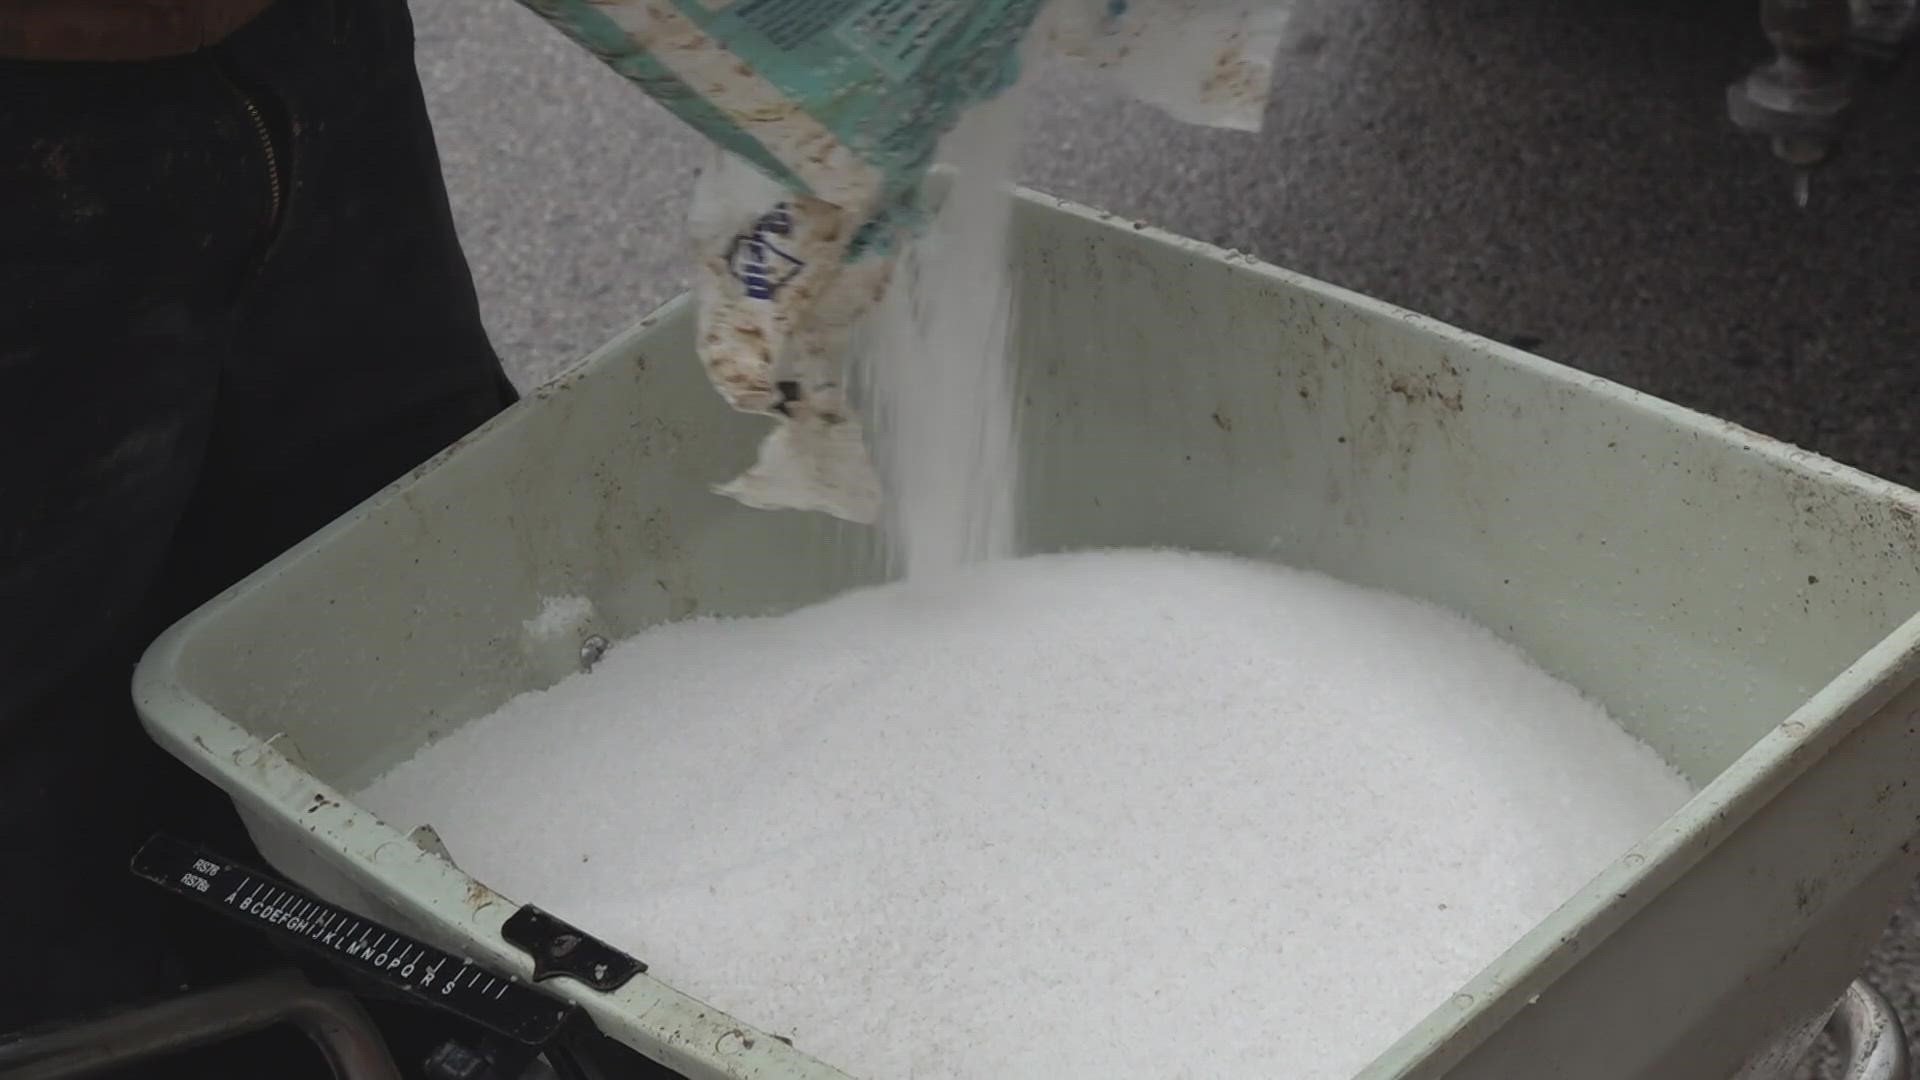 Crews are helping keep the streets safe by salting parking lots and high-traffic walkways.